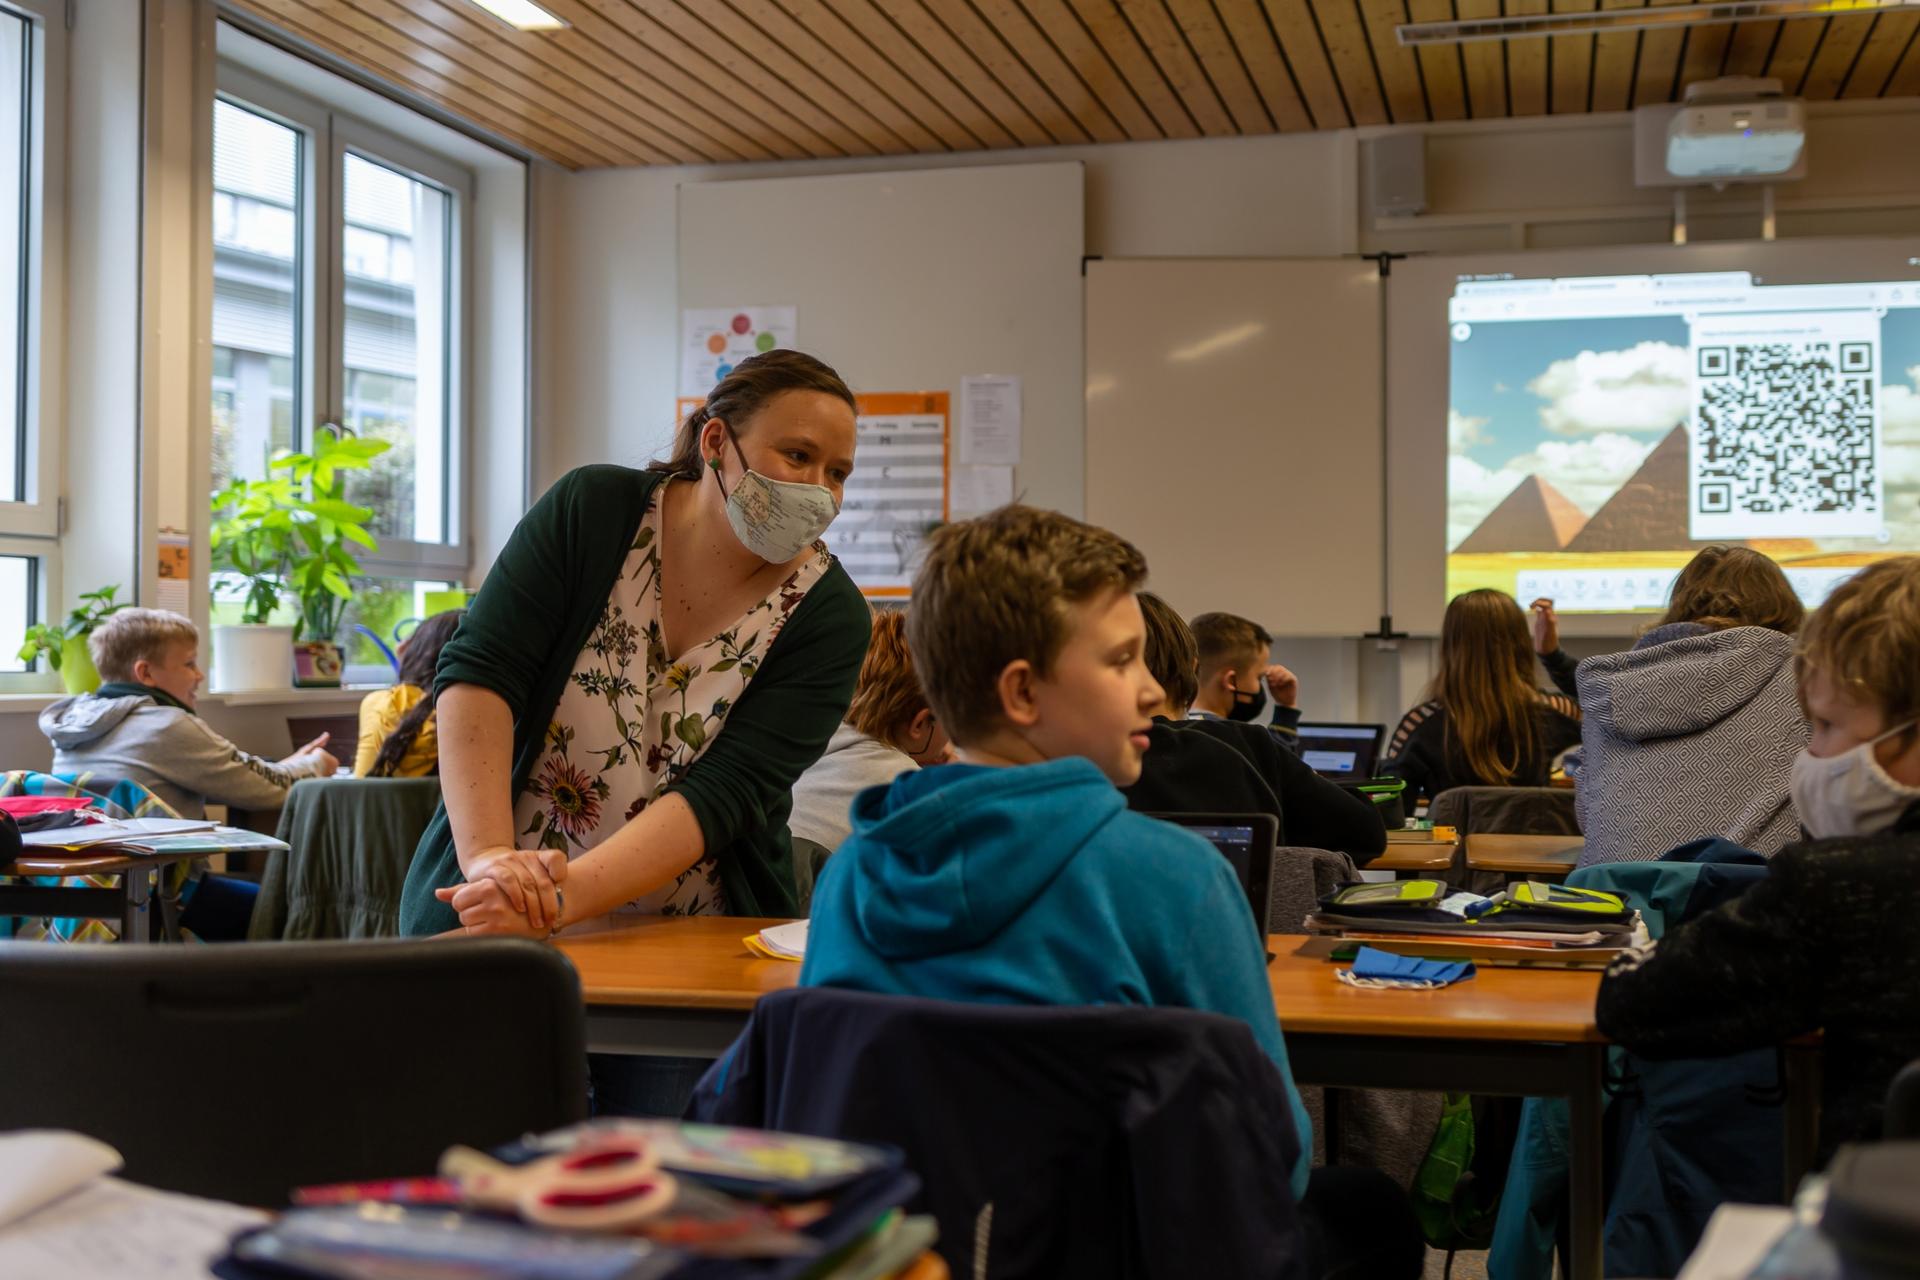 Teacher Inga Deppa works with students in an English class at Jacobishule in Kalletal, Germany. Masks were optional for students when they were seated at their desks but the regional health authority has since tighten mask rules for older students.